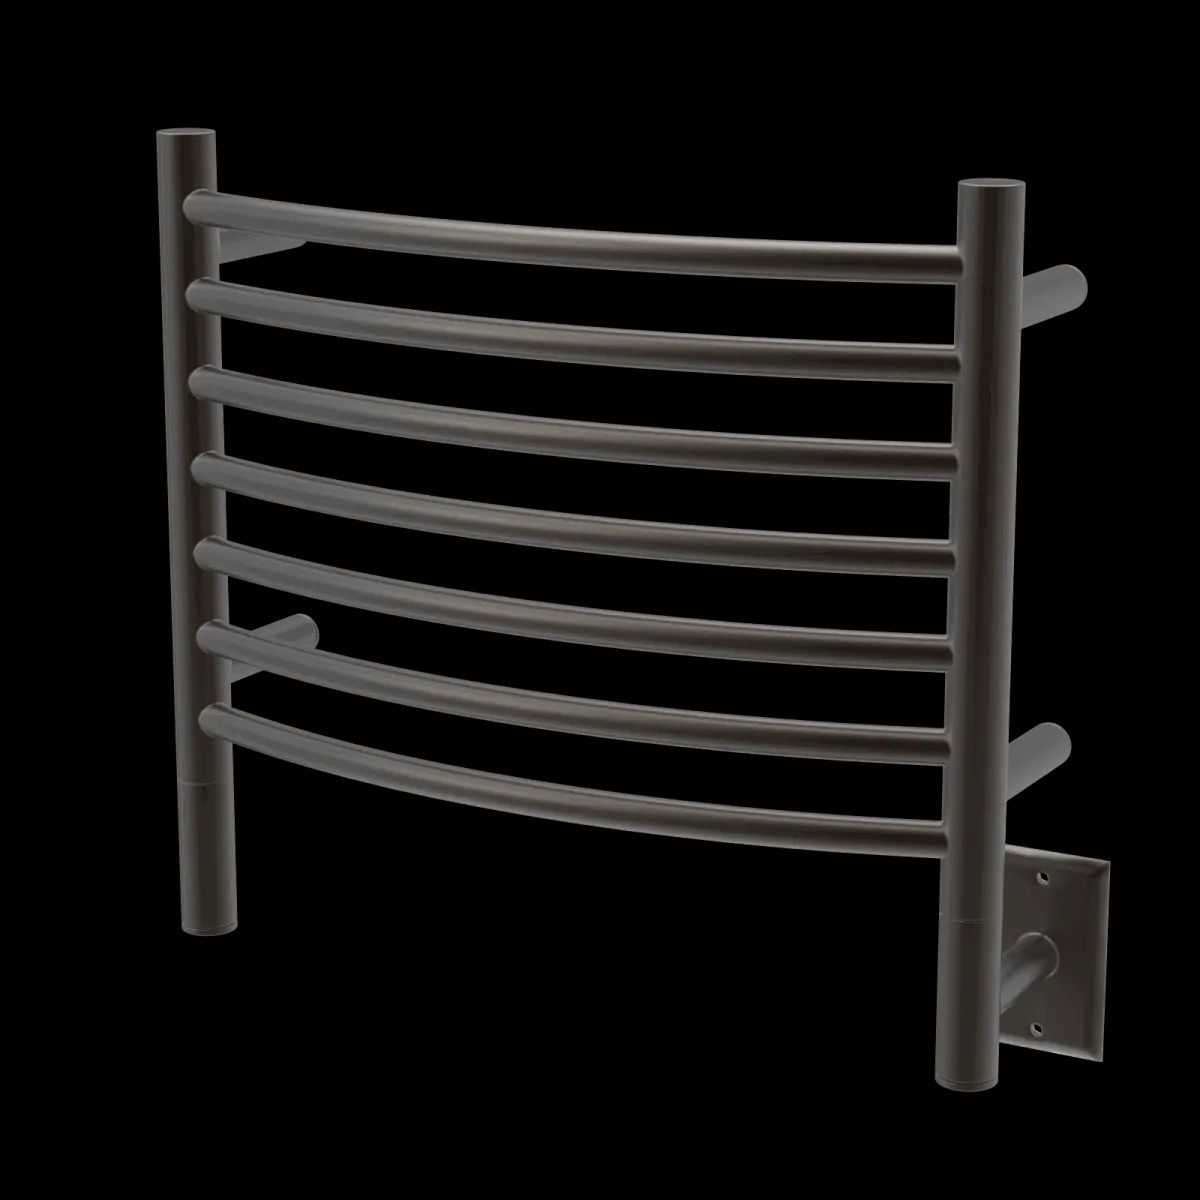 Amba HCO Model H Curved 7 Bar Hardwired Towel Warmer - Oil Rubbed Bronze